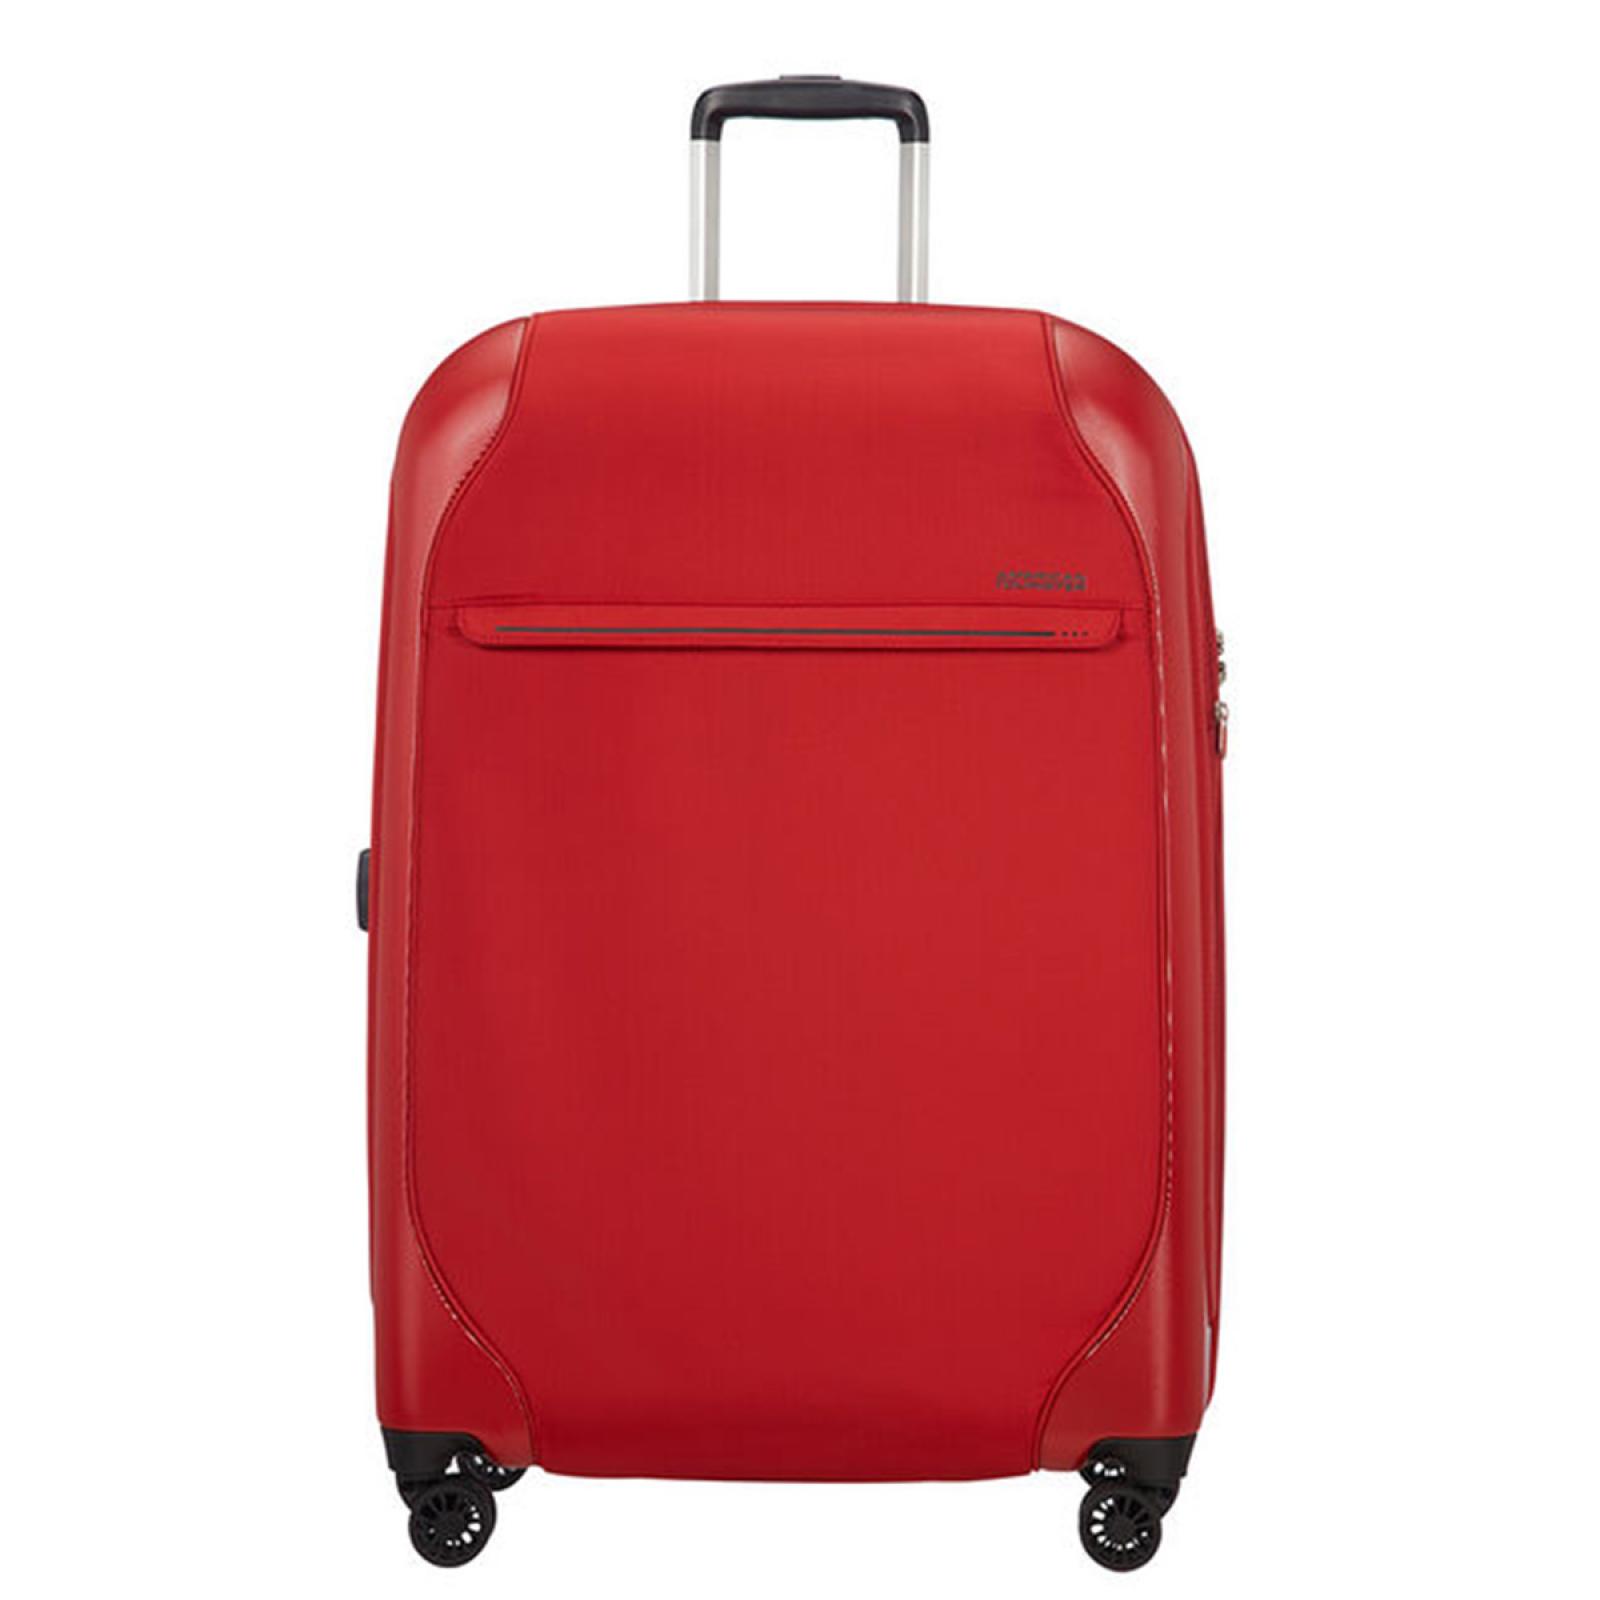 American Tourister Large Luggage Skyglider Spinner 76 cm - 1